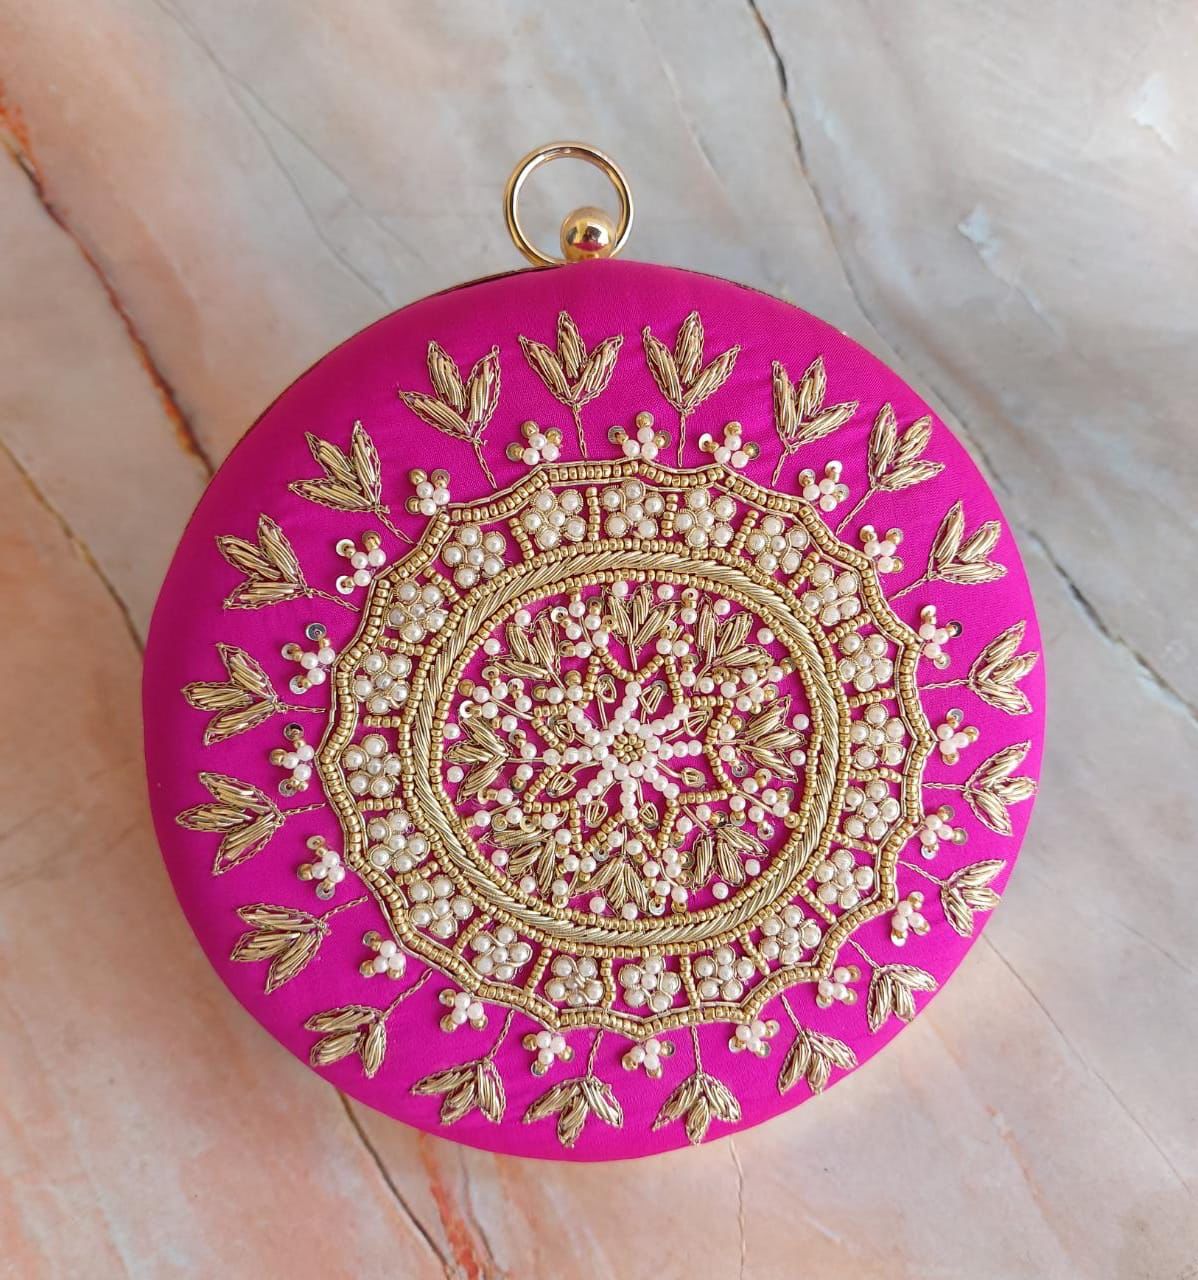 Round embroidery clutch